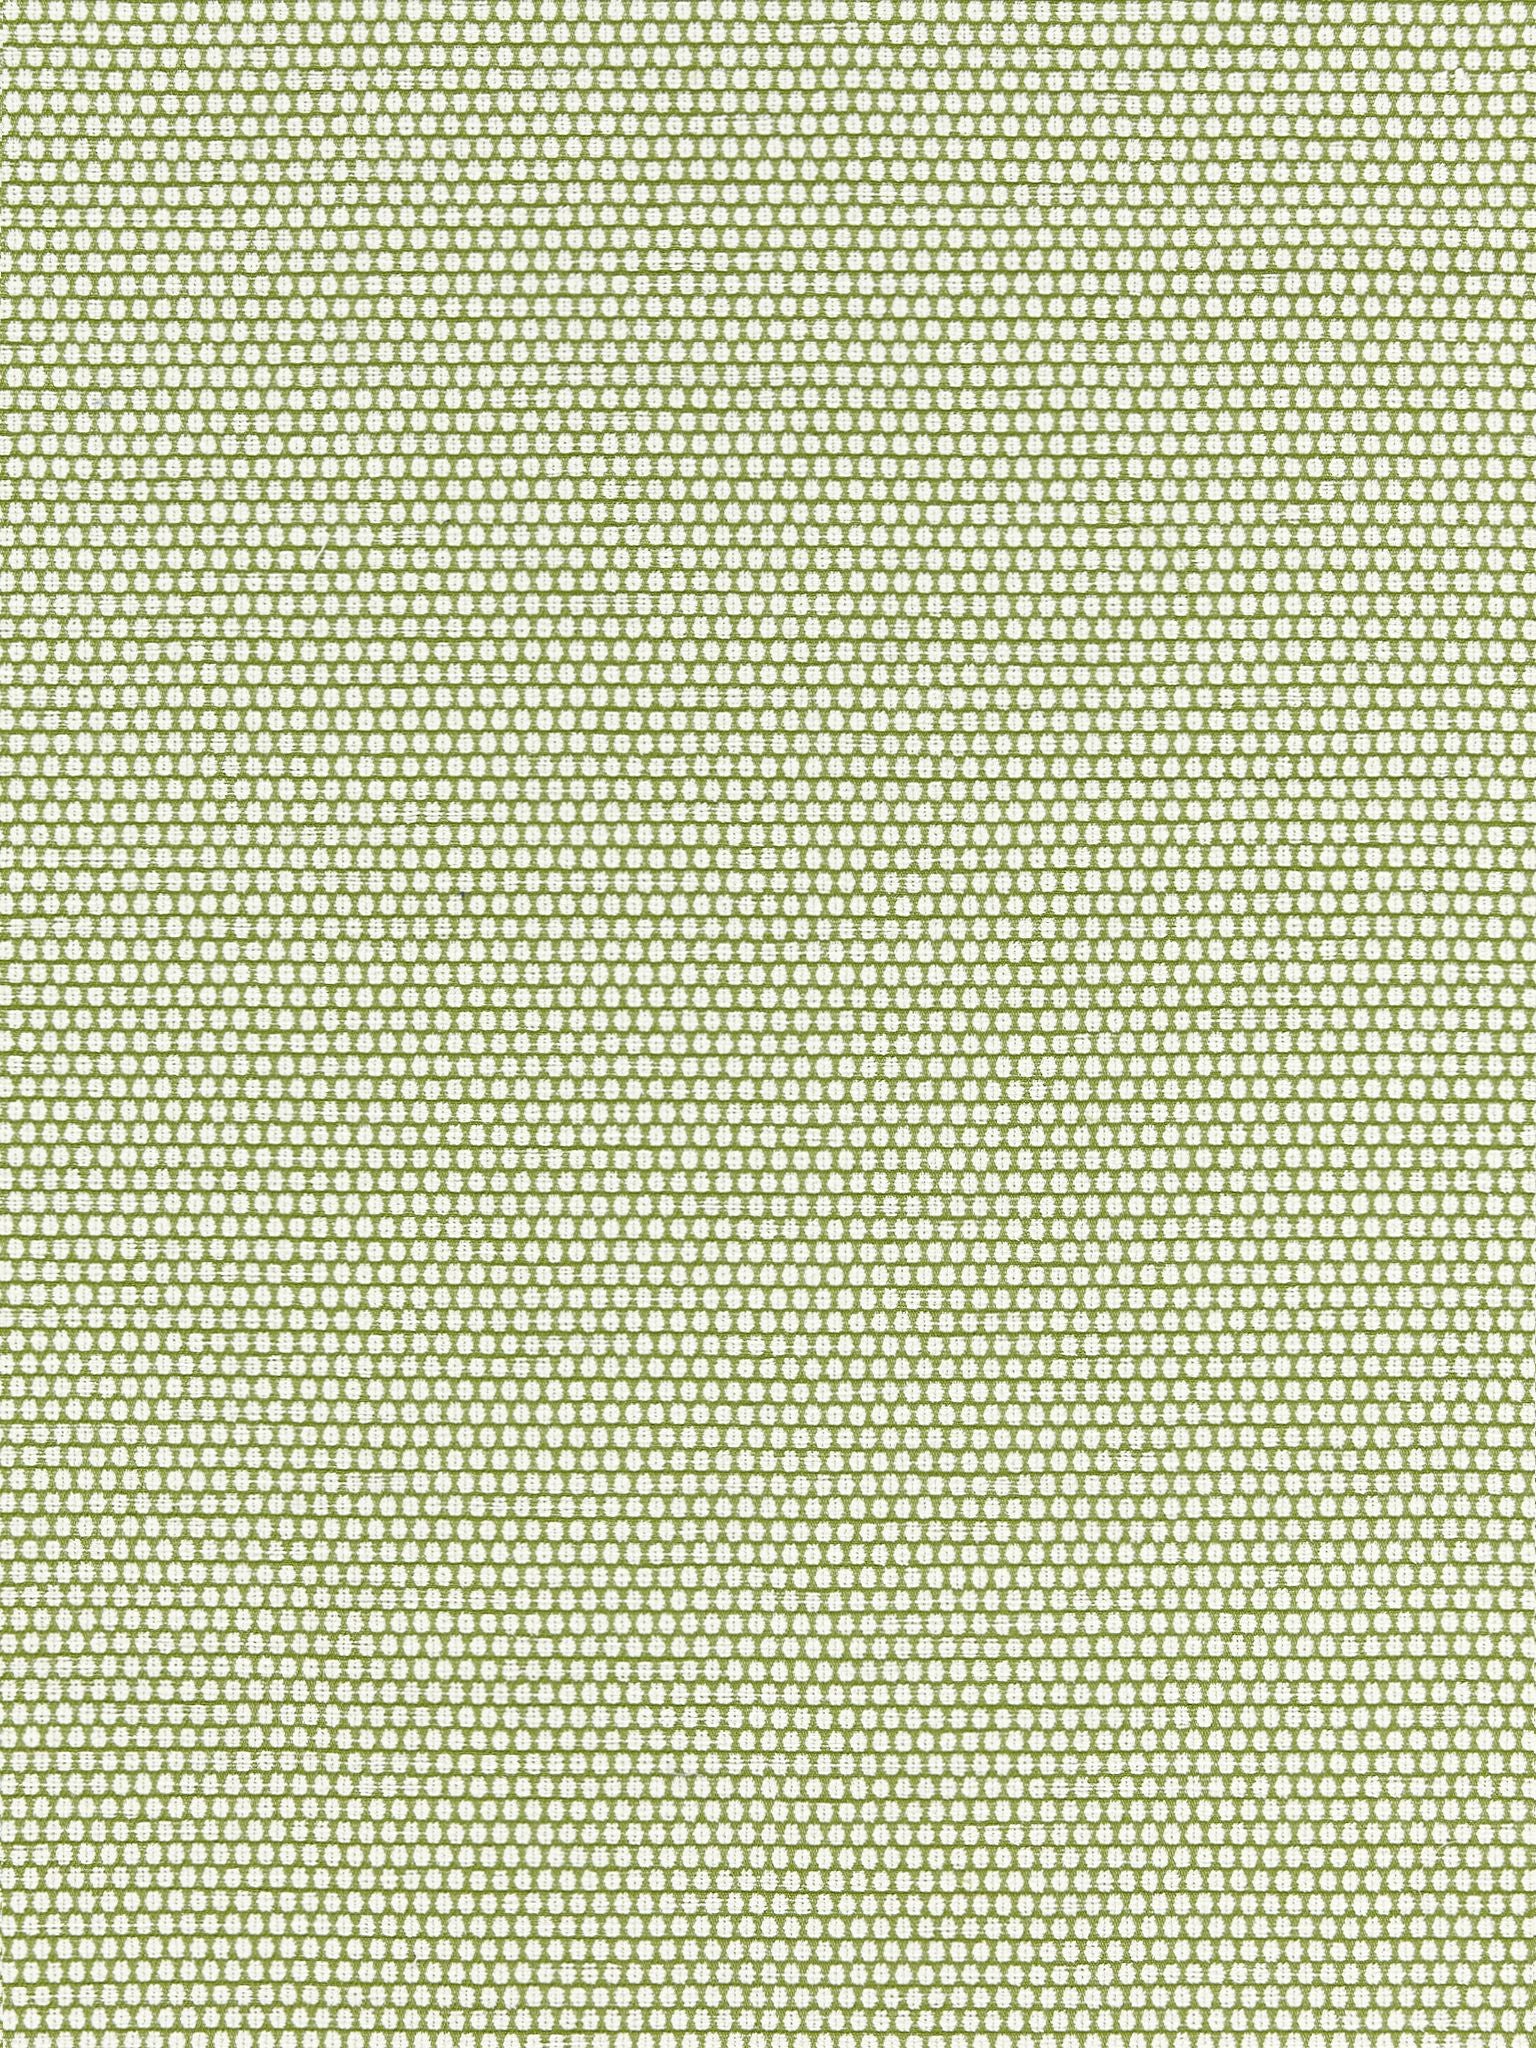 Corsica Weave fabric in palm color - pattern number SC 000327190 - by Scalamandre in the Scalamandre Fabrics Book 1 collection